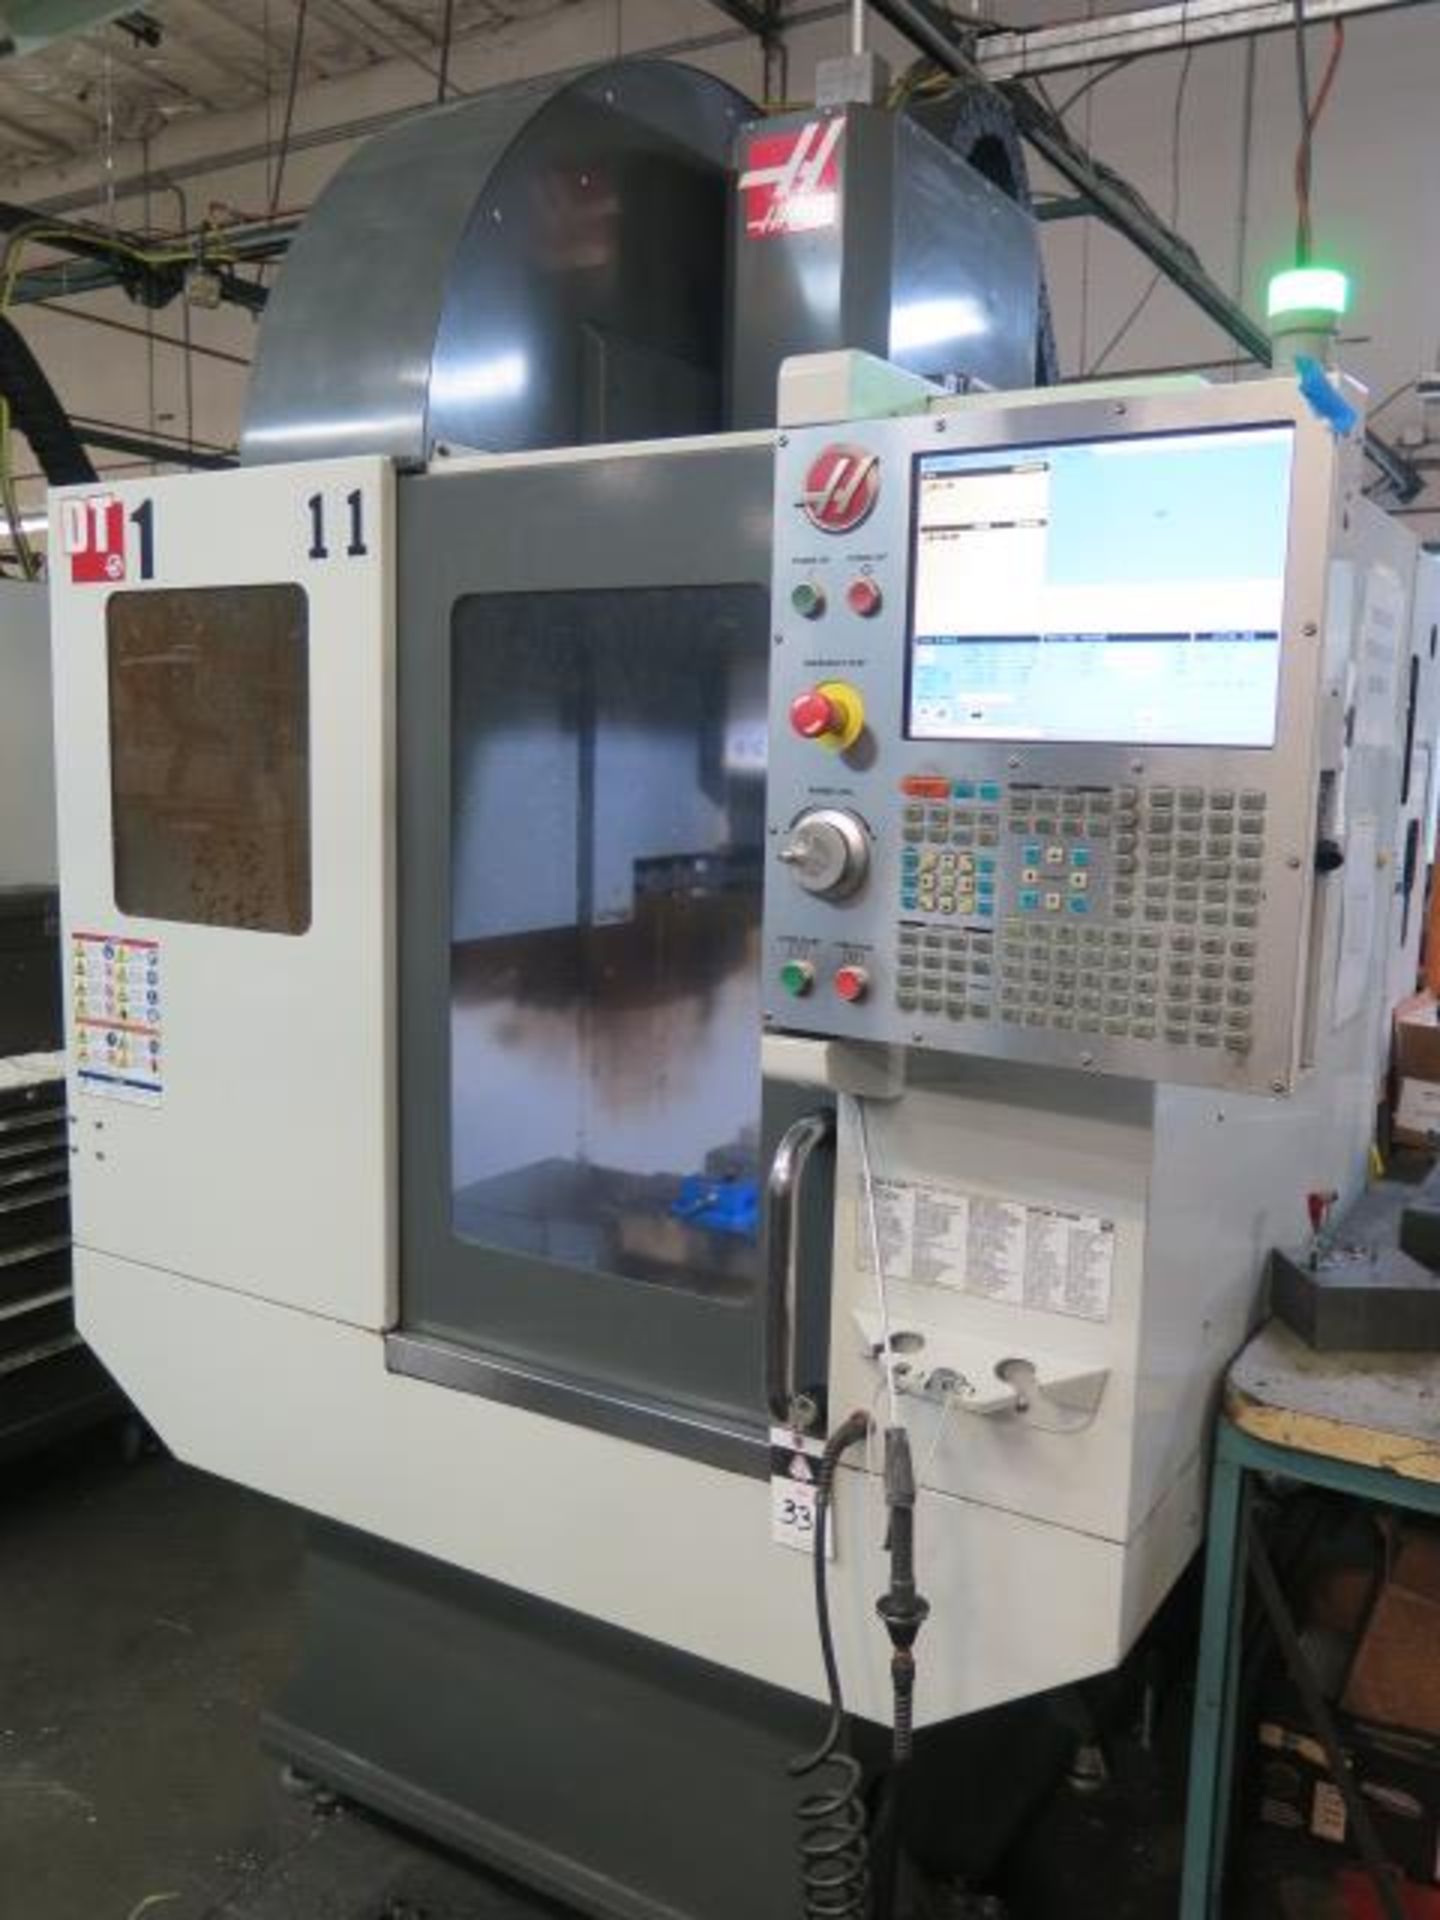 DEC/2014 Haas DT-1 CNC VMC s/n 1118934 w/ Haas Controls, 20-Station ATC, BT-30, SOLD AS IS - Image 2 of 16